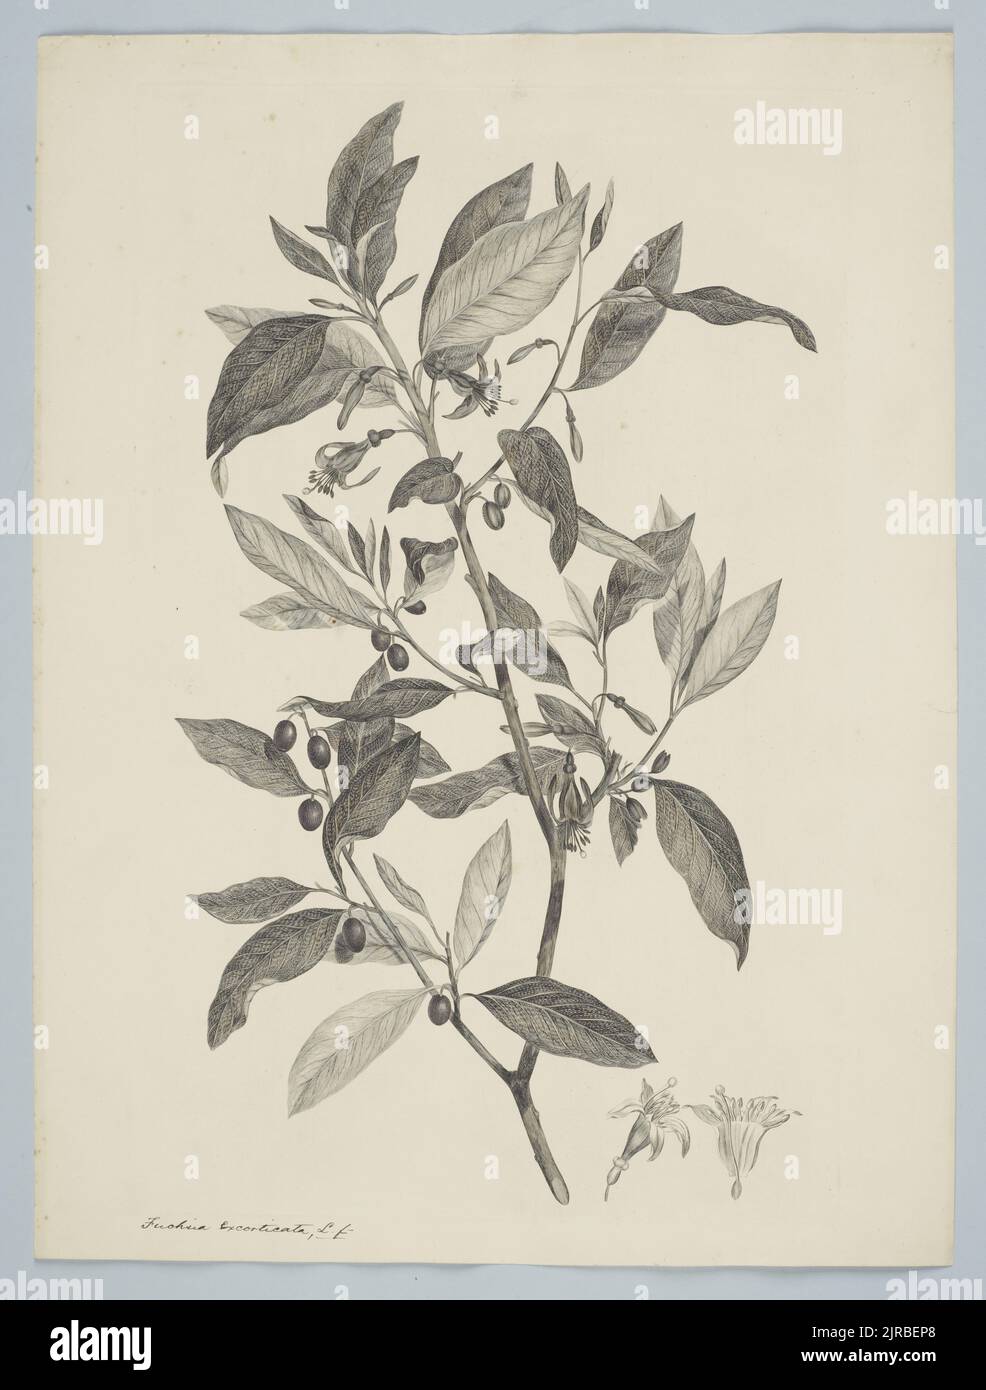 Fuchsia excorticata (Forster & G. Forster) Linnaeus f., 1895, United Kingdom, by Sydney Parkinson. Gift of the British Museum, 1895. Stock Photo